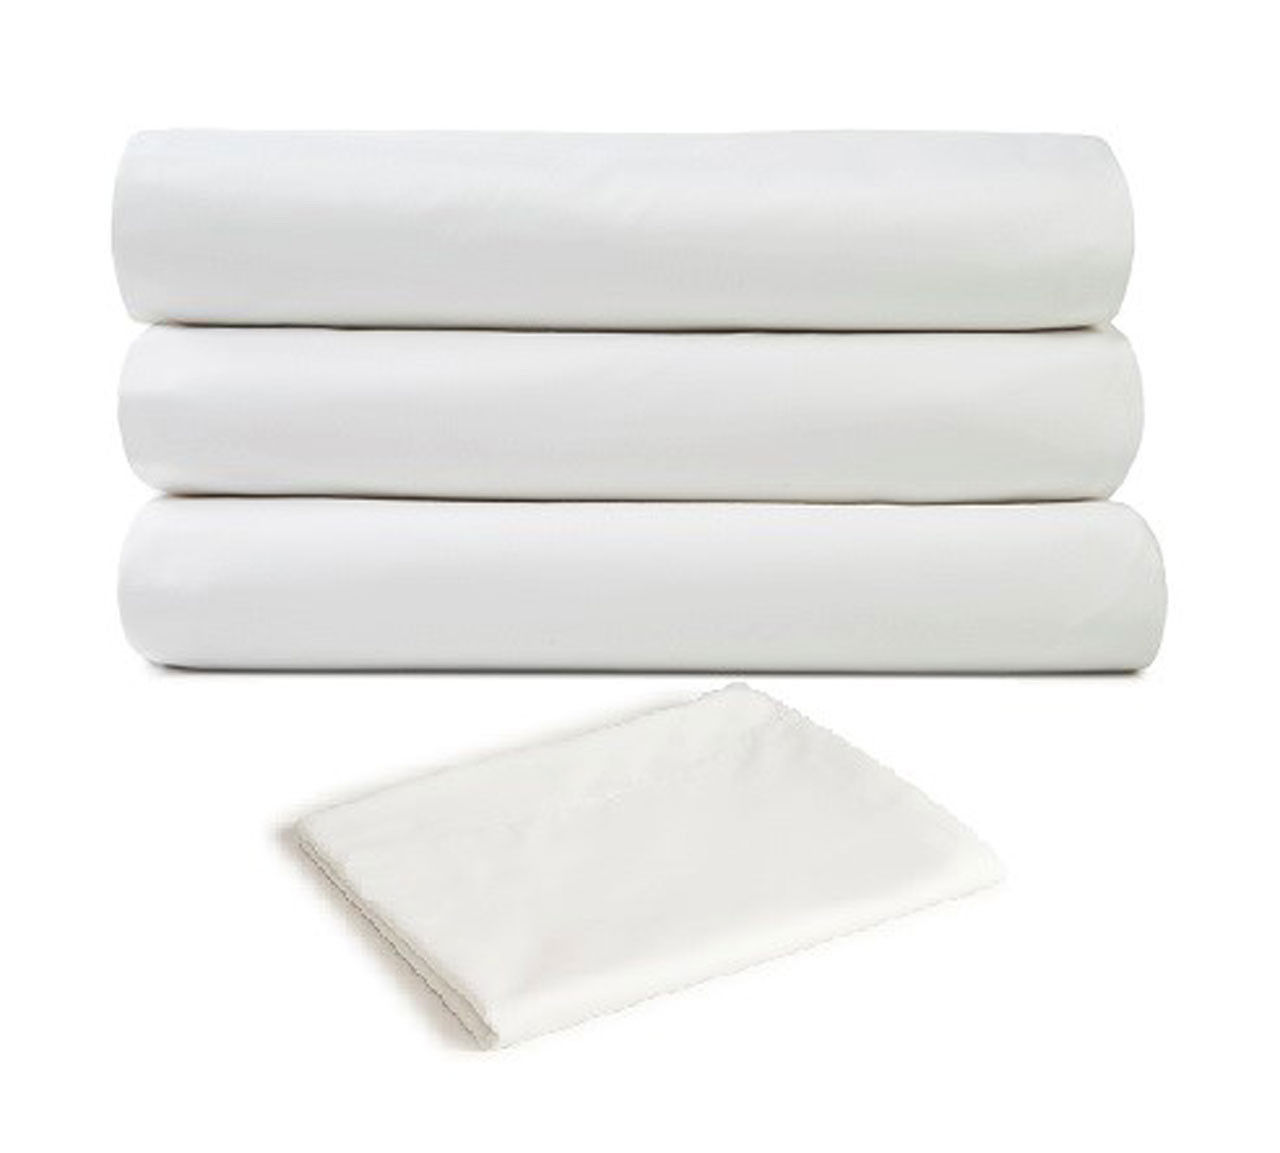 What color are these 100 polyester bed sheets?